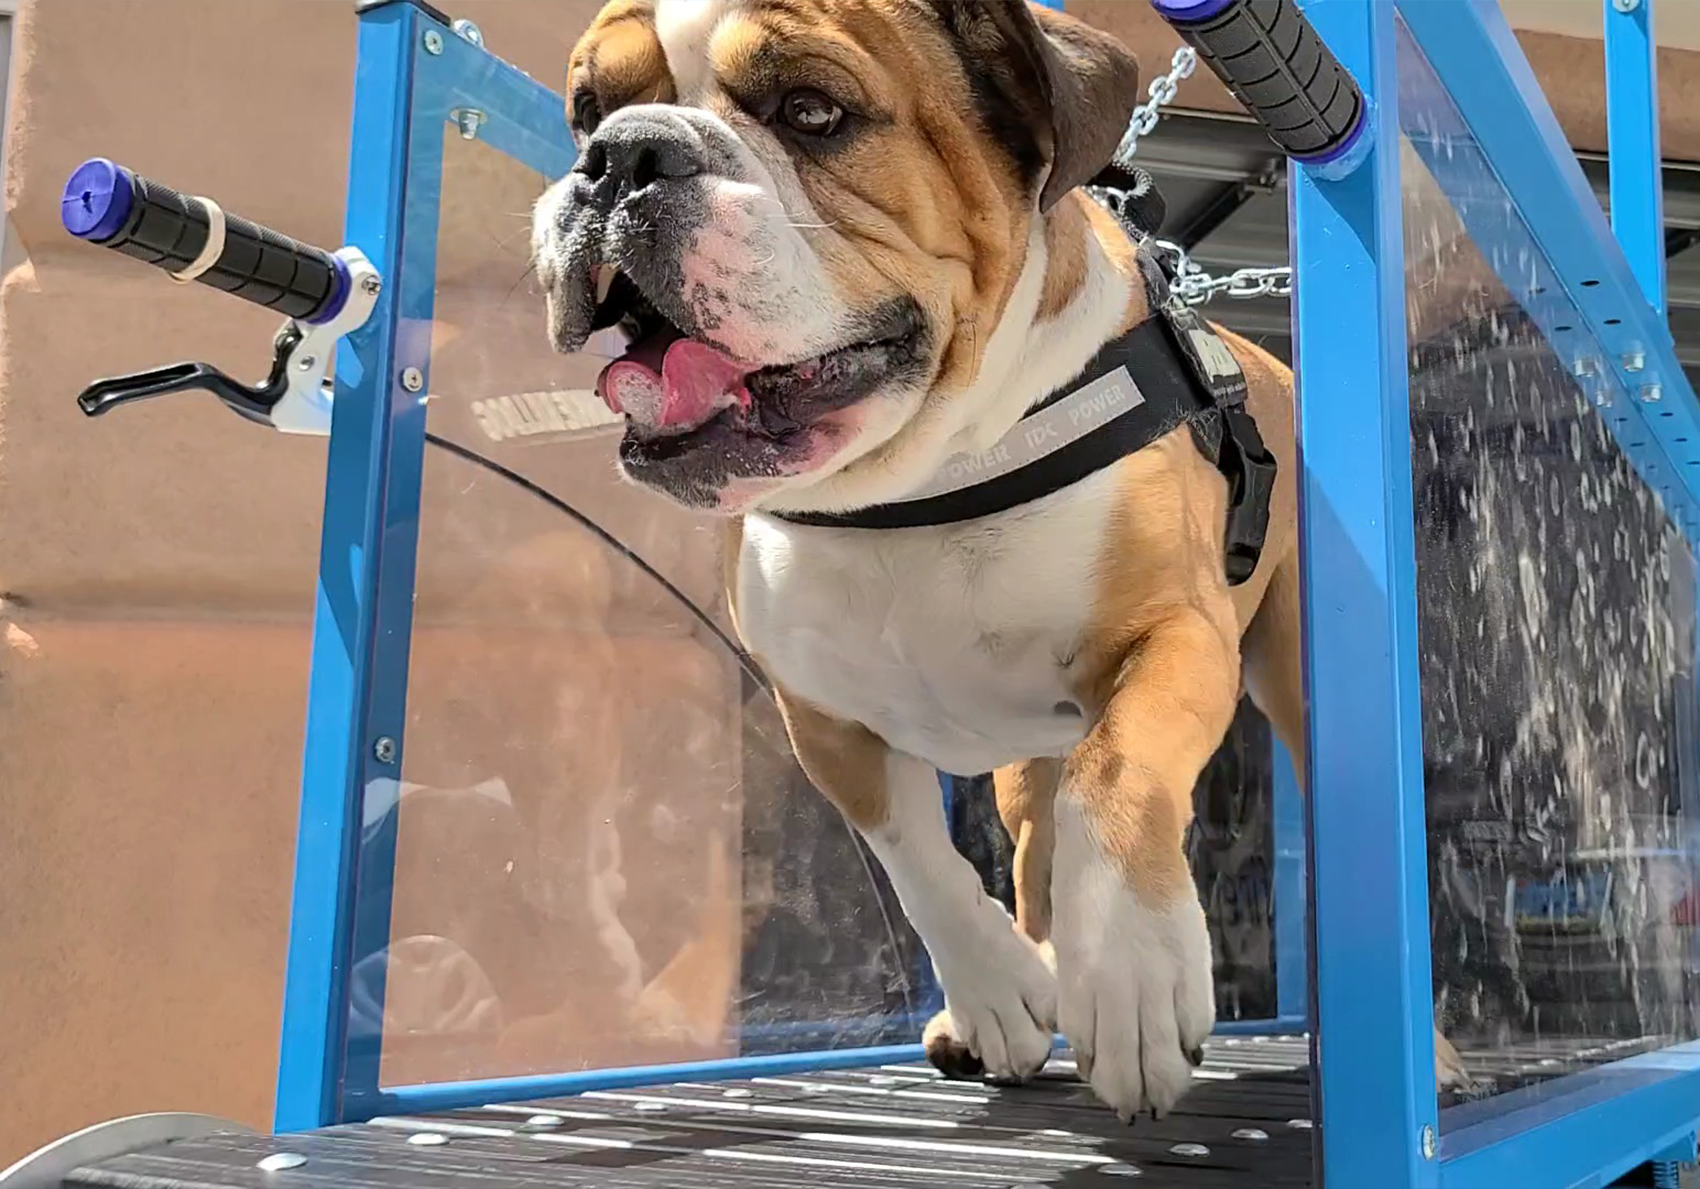 Bark N' Roll provides mobile treadmill service, exercise to dogs